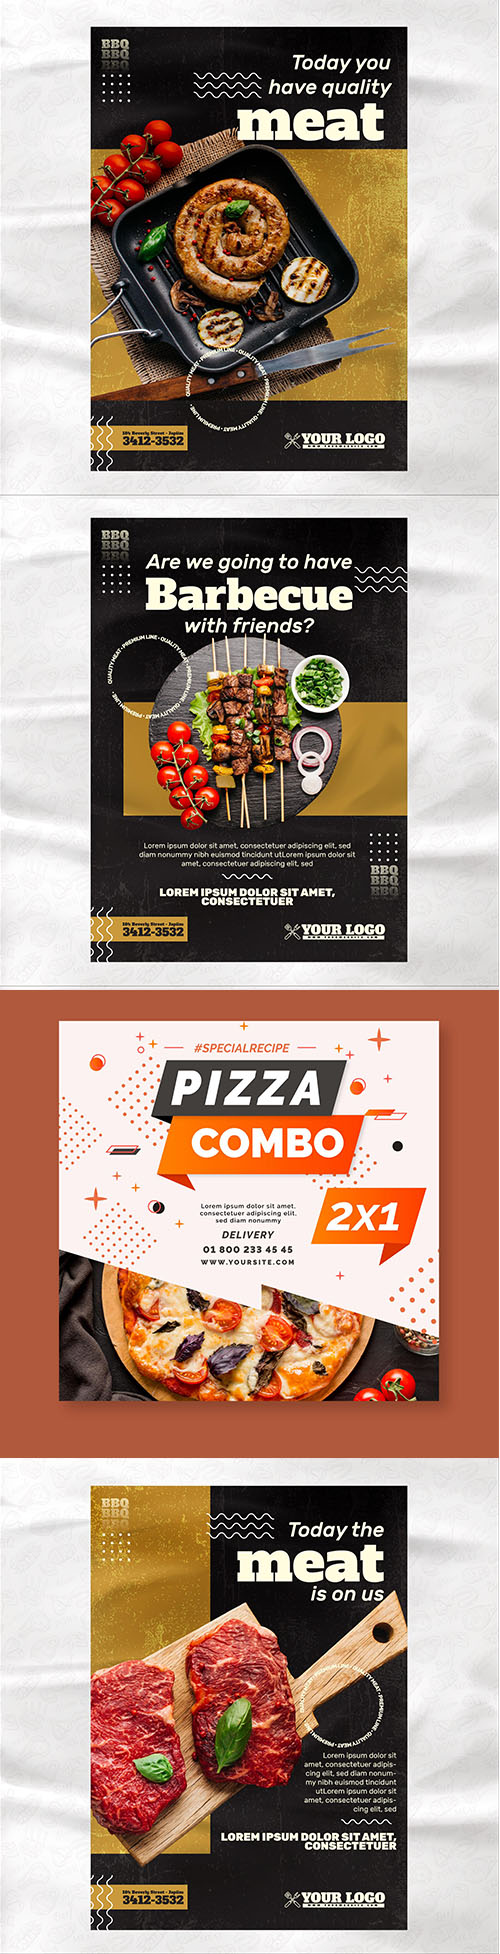 Barbecue and pizza poster template